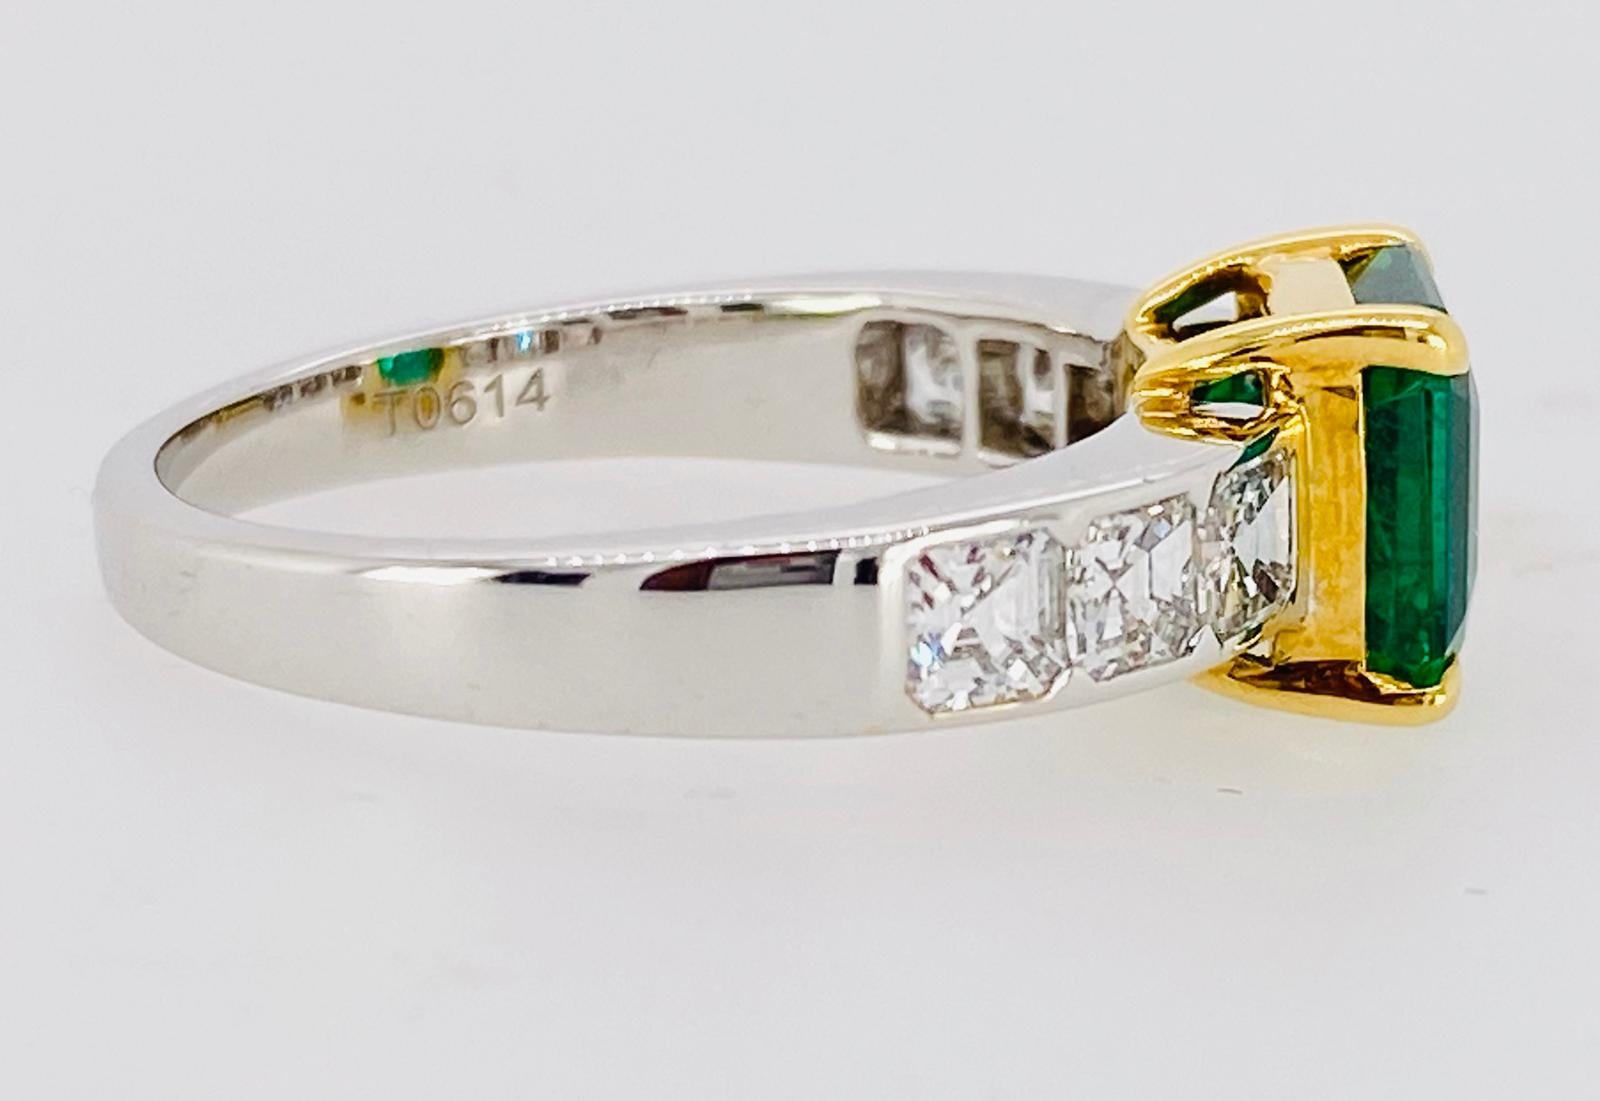 A single, Asscher cut Emerald accented with six graduated Asscher cut Diamonds is set in a hand fabricated, 18k white and yellow gold setting.
Certified, Vivid Color Emerald.

Emerald:  1.95 carats, approx 7mm x 7mm
Six Asscher cut Diamonds, 4mm,